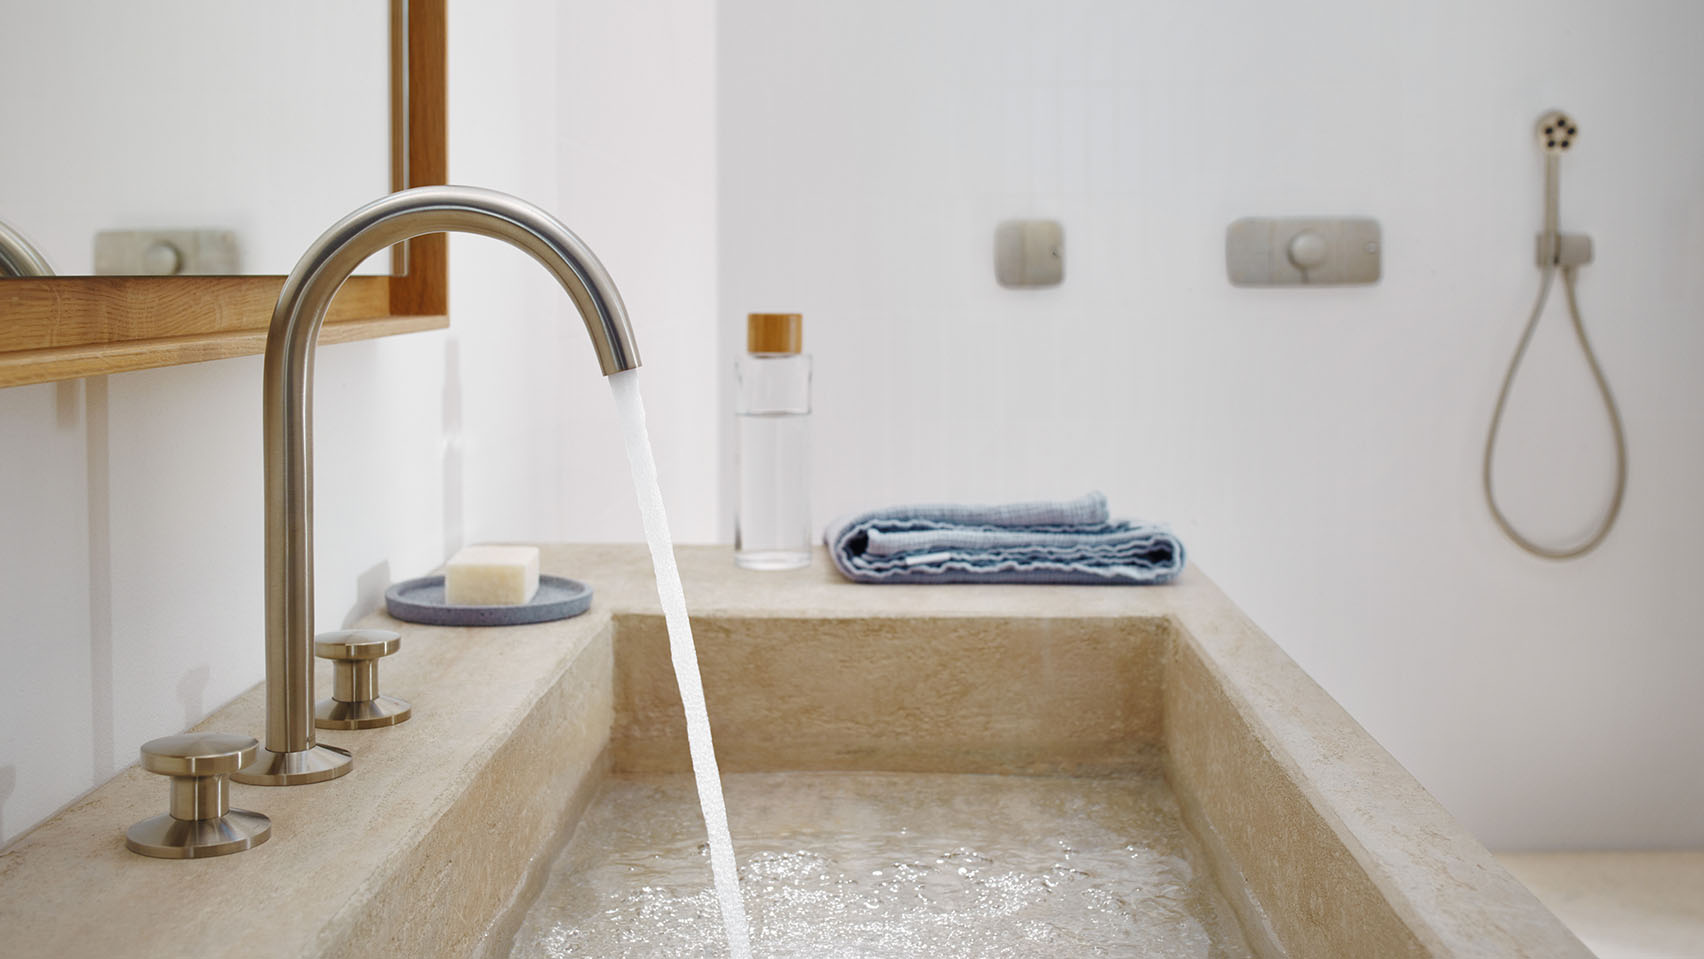 Vochtig Penelope Onderhoudbaar AXOR launches minimalist collection of faucets by Barber and Osgerby